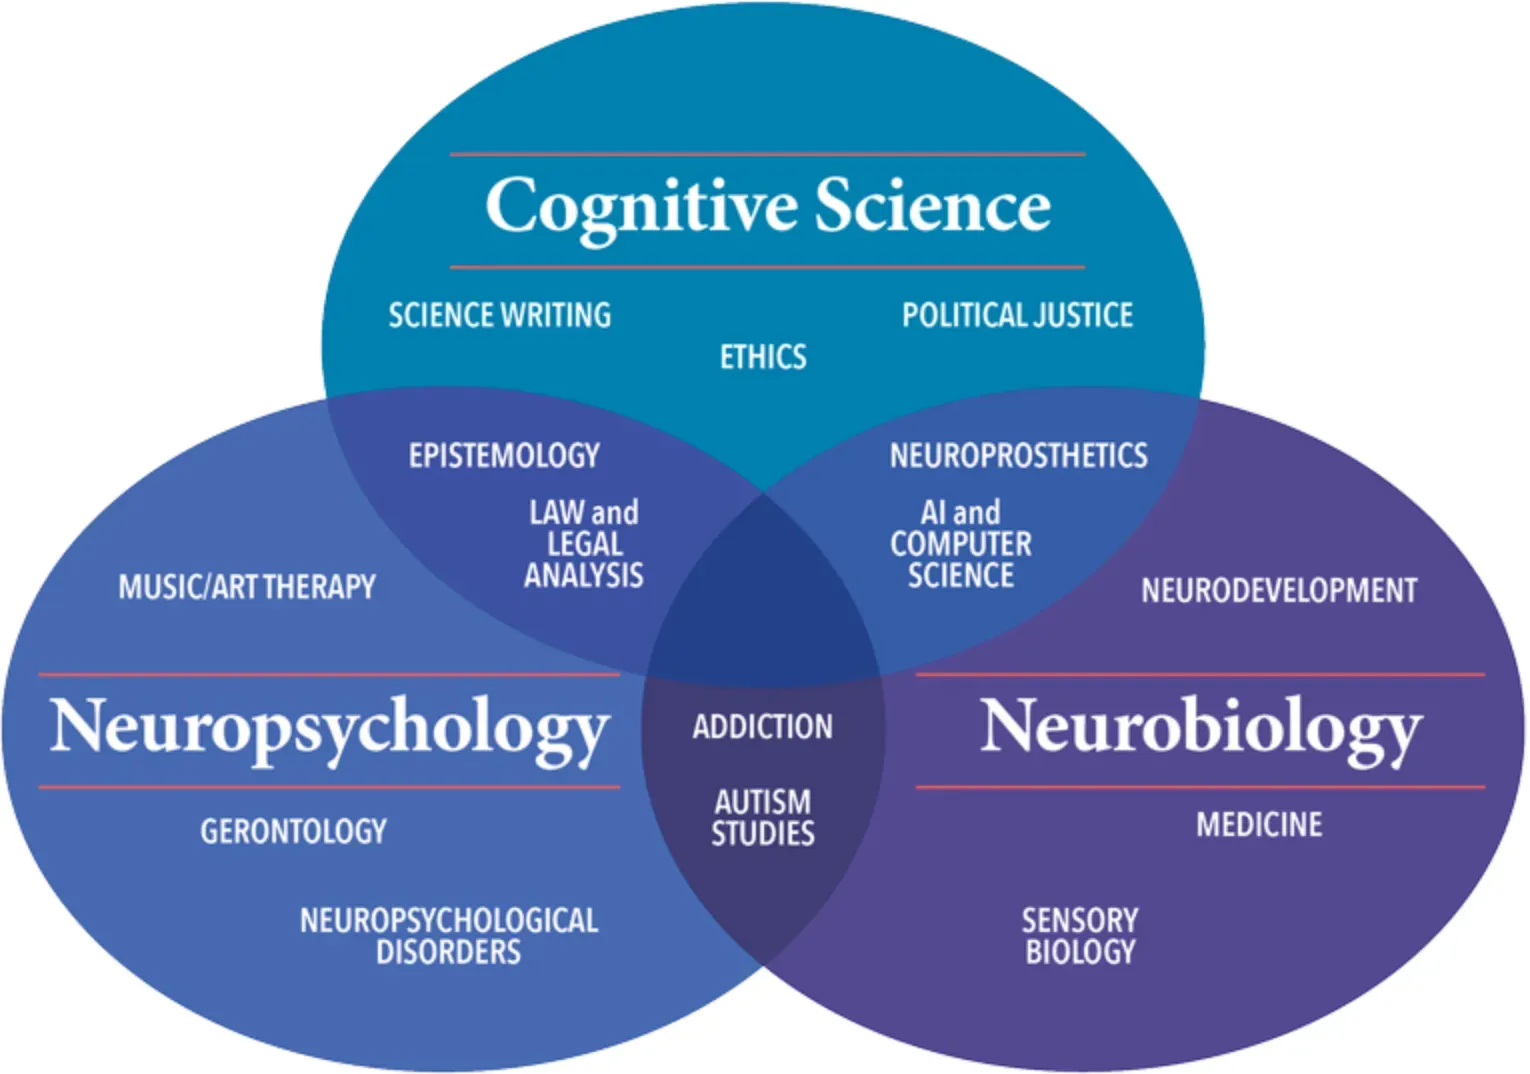 Neuroscience in Cognitive Science